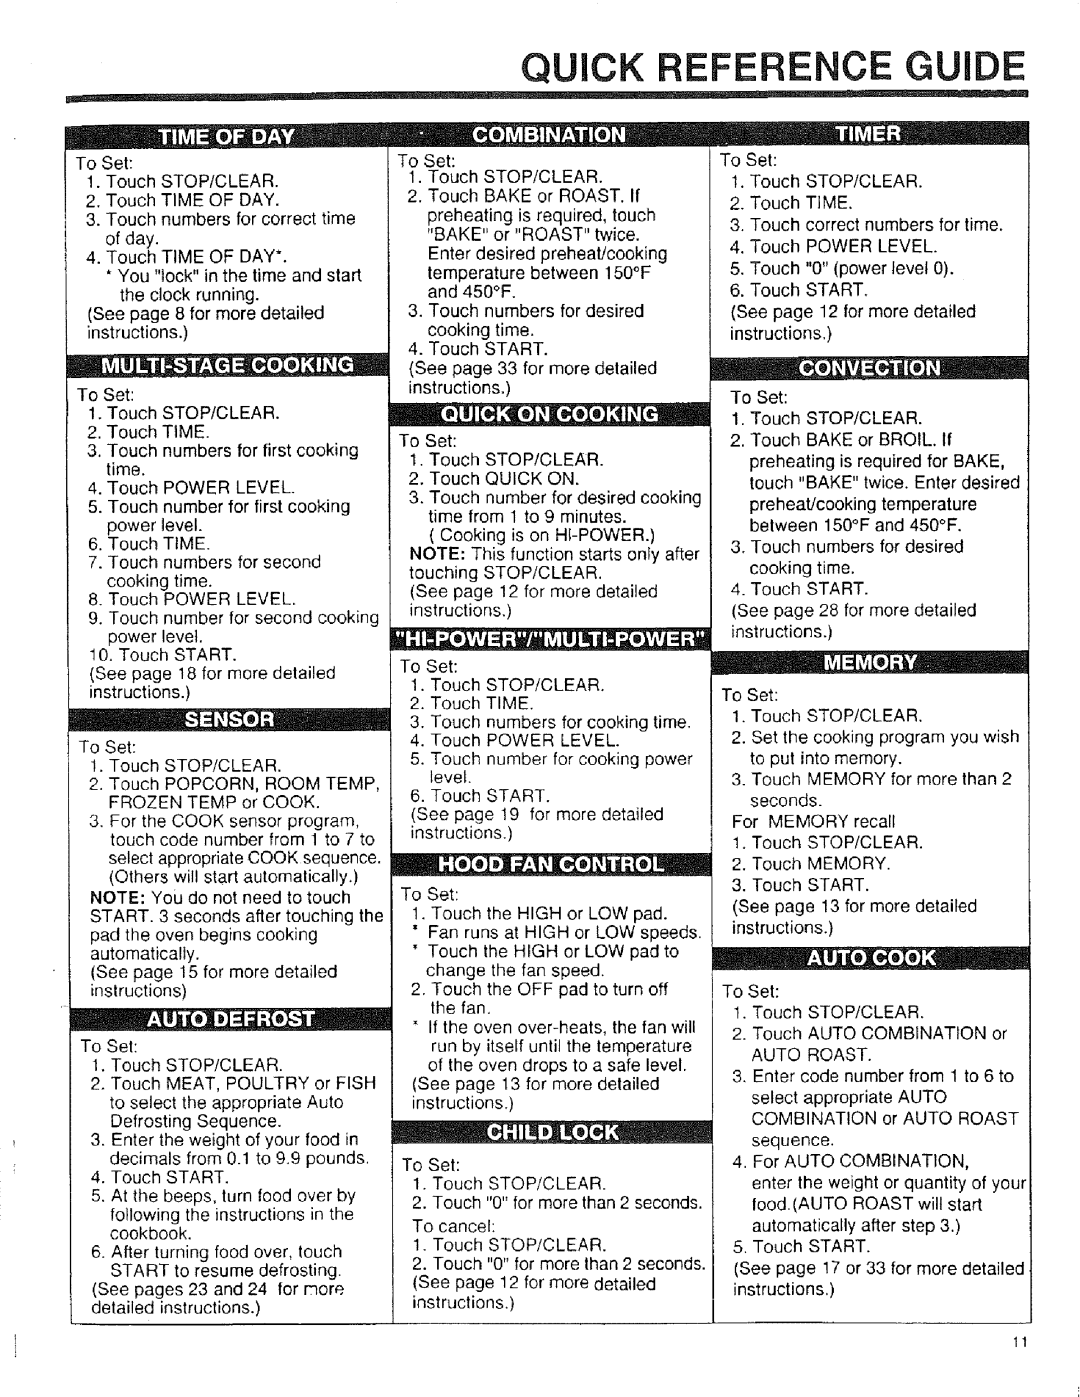 Sears 89950, 89952, 89951 manual Quick Reference Guide 